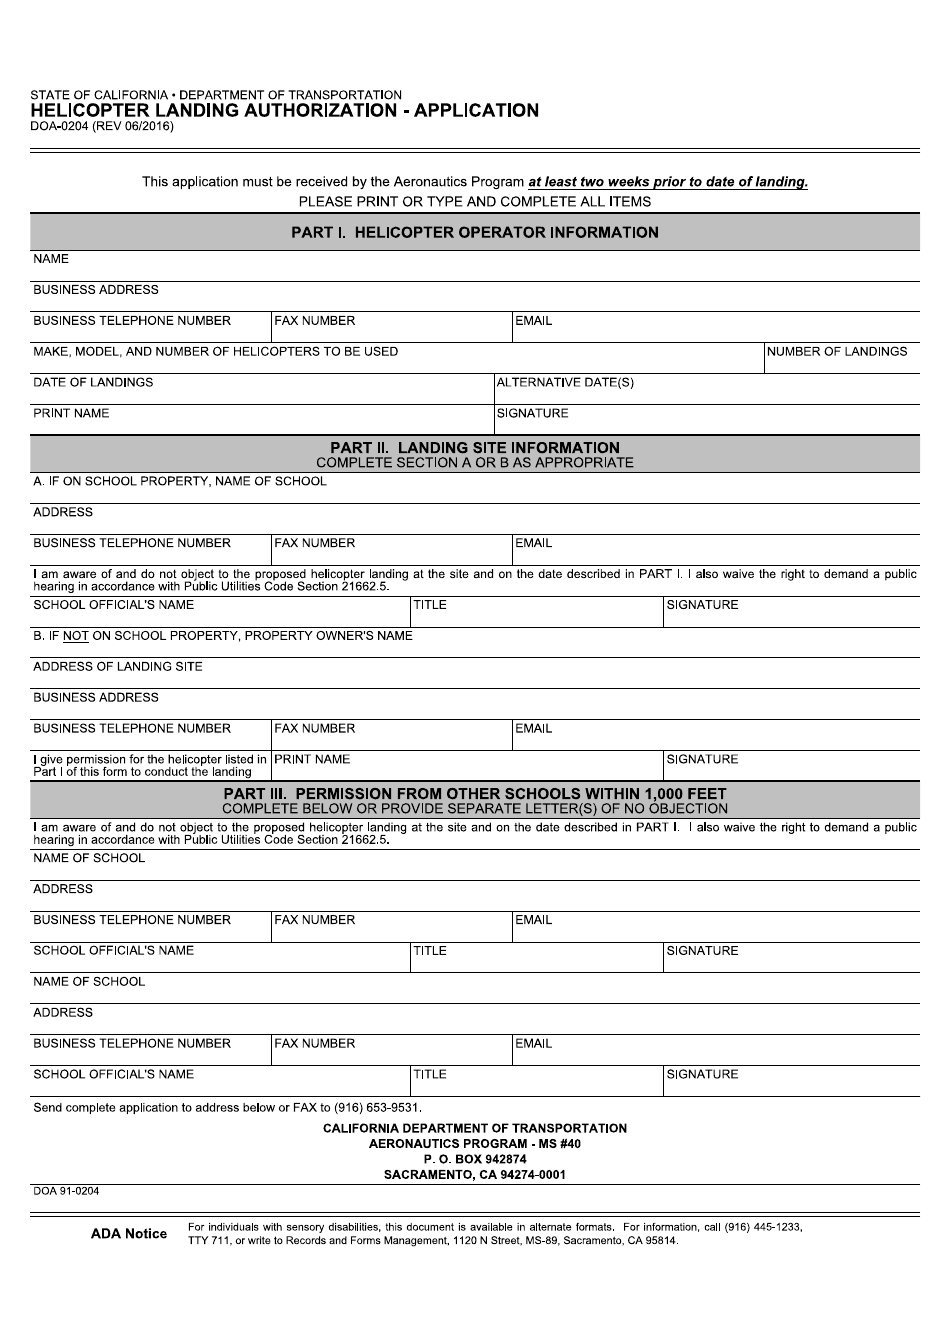 Form DOA-0204 Helicopter Landing Authorization - Application - California, Page 1